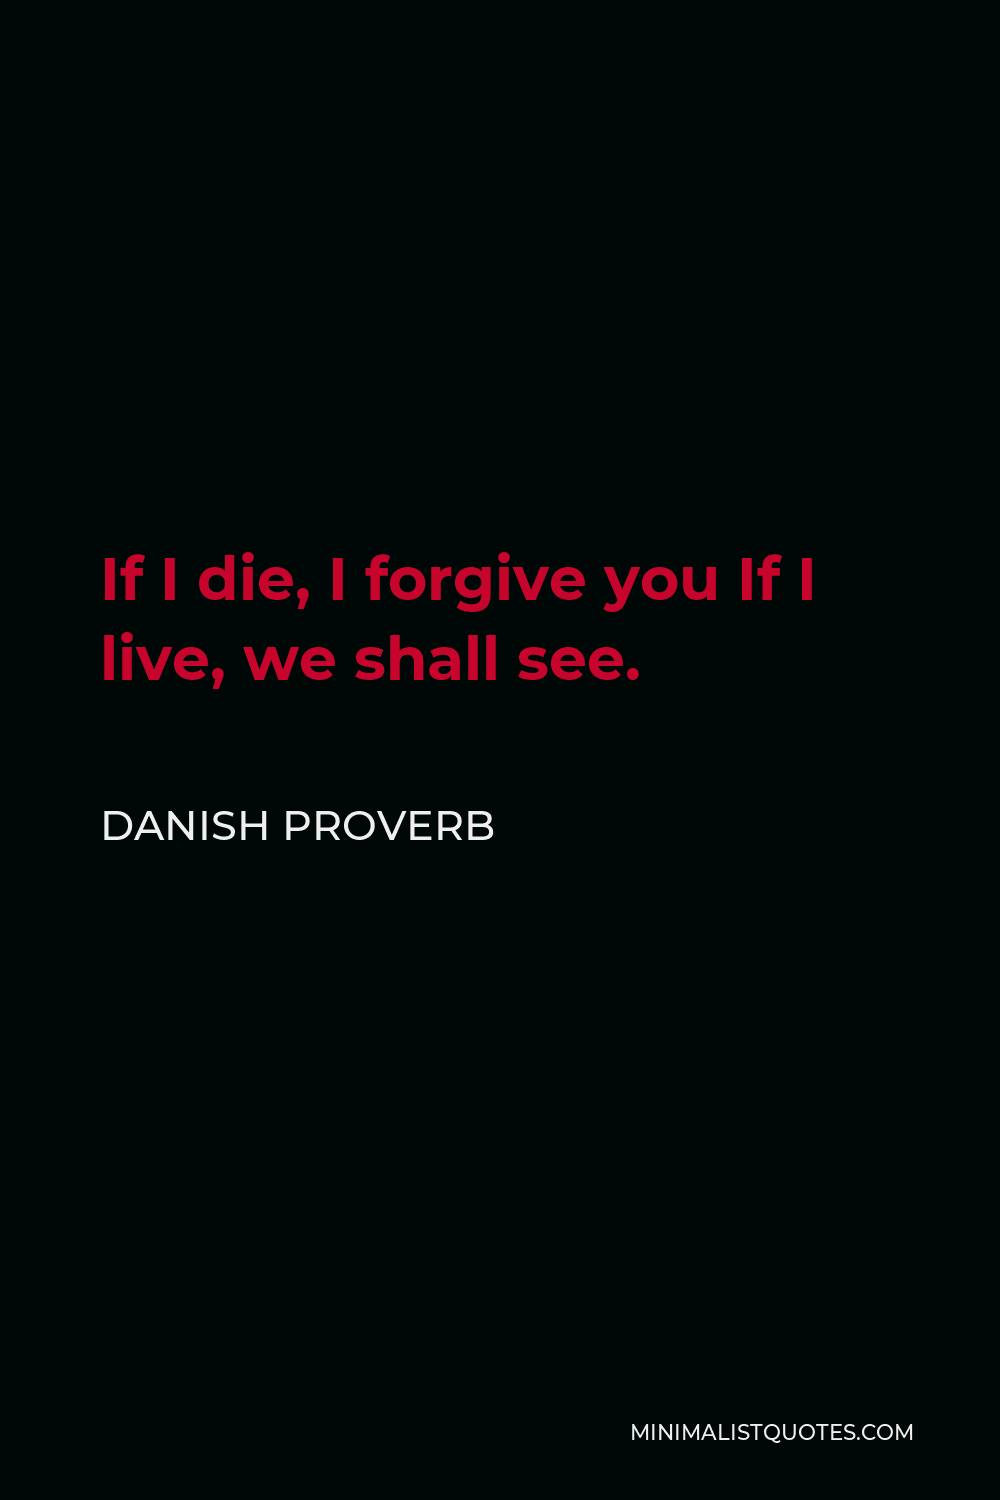 Danish Proverb Quote - If I die, I forgive you If I live, we shall see.